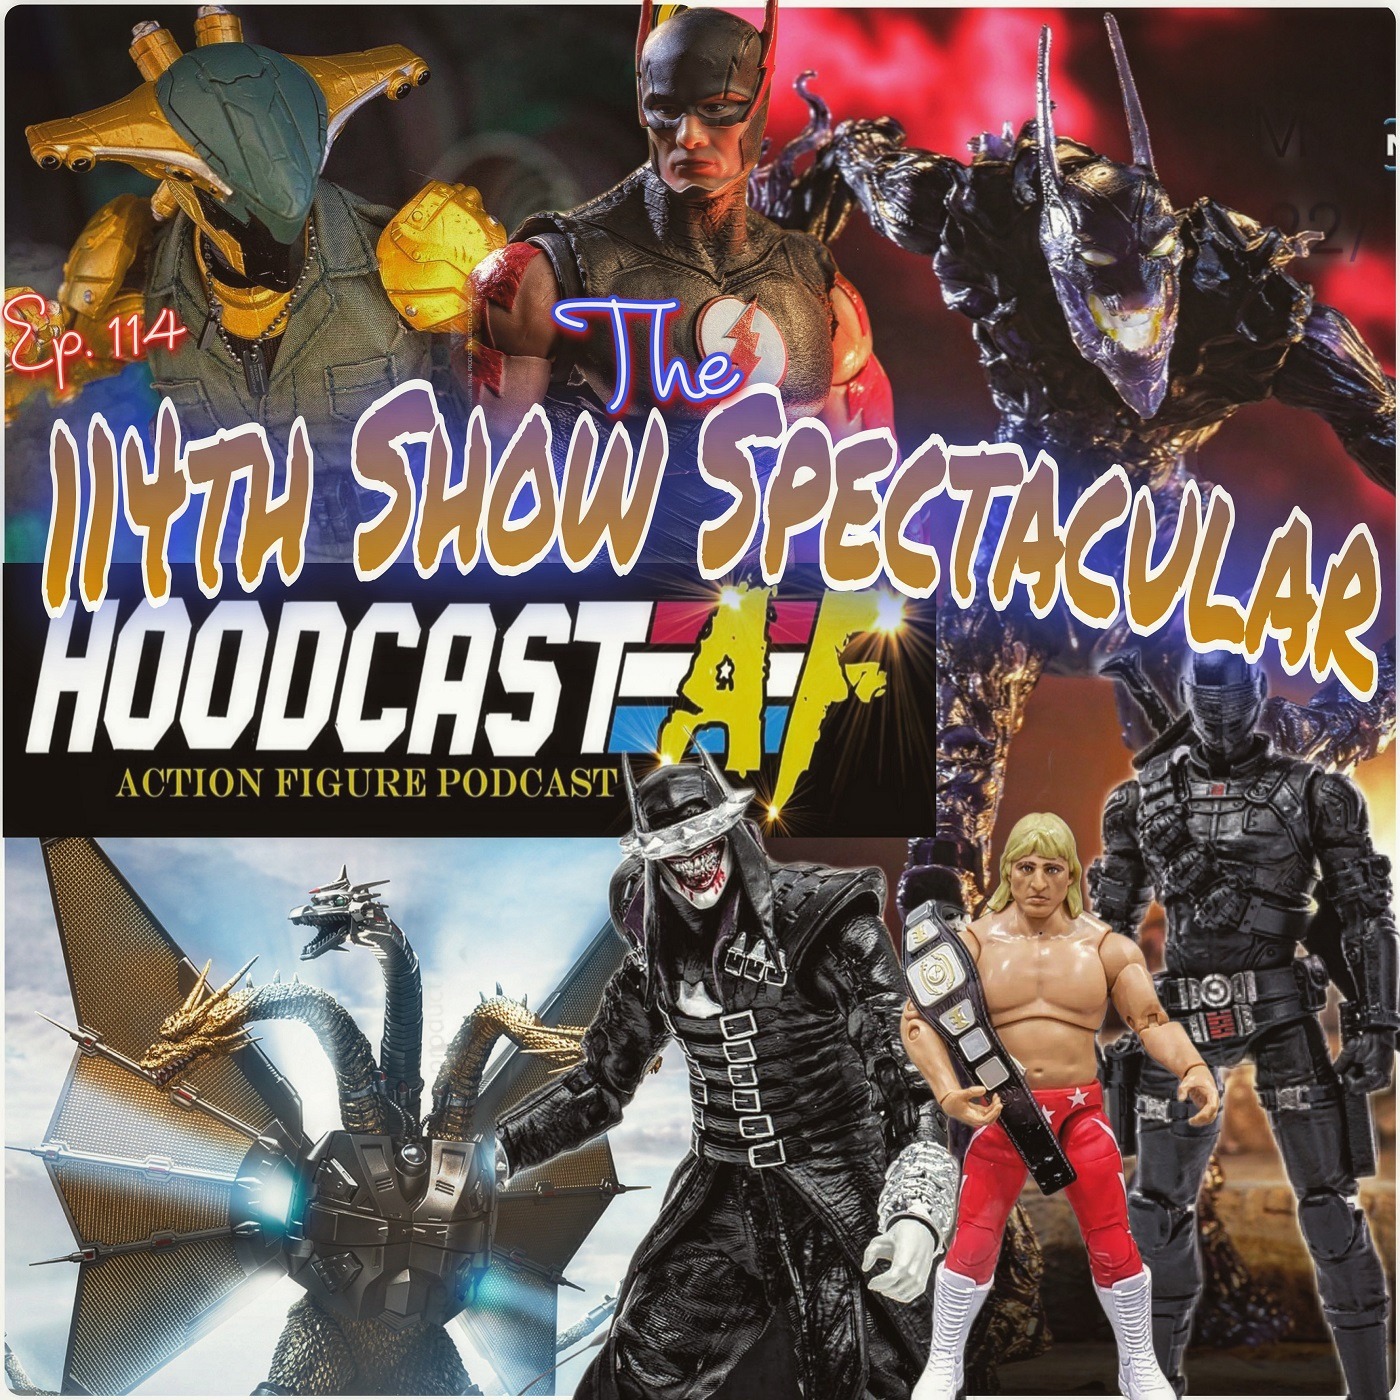 The 114th Show Spectacular!